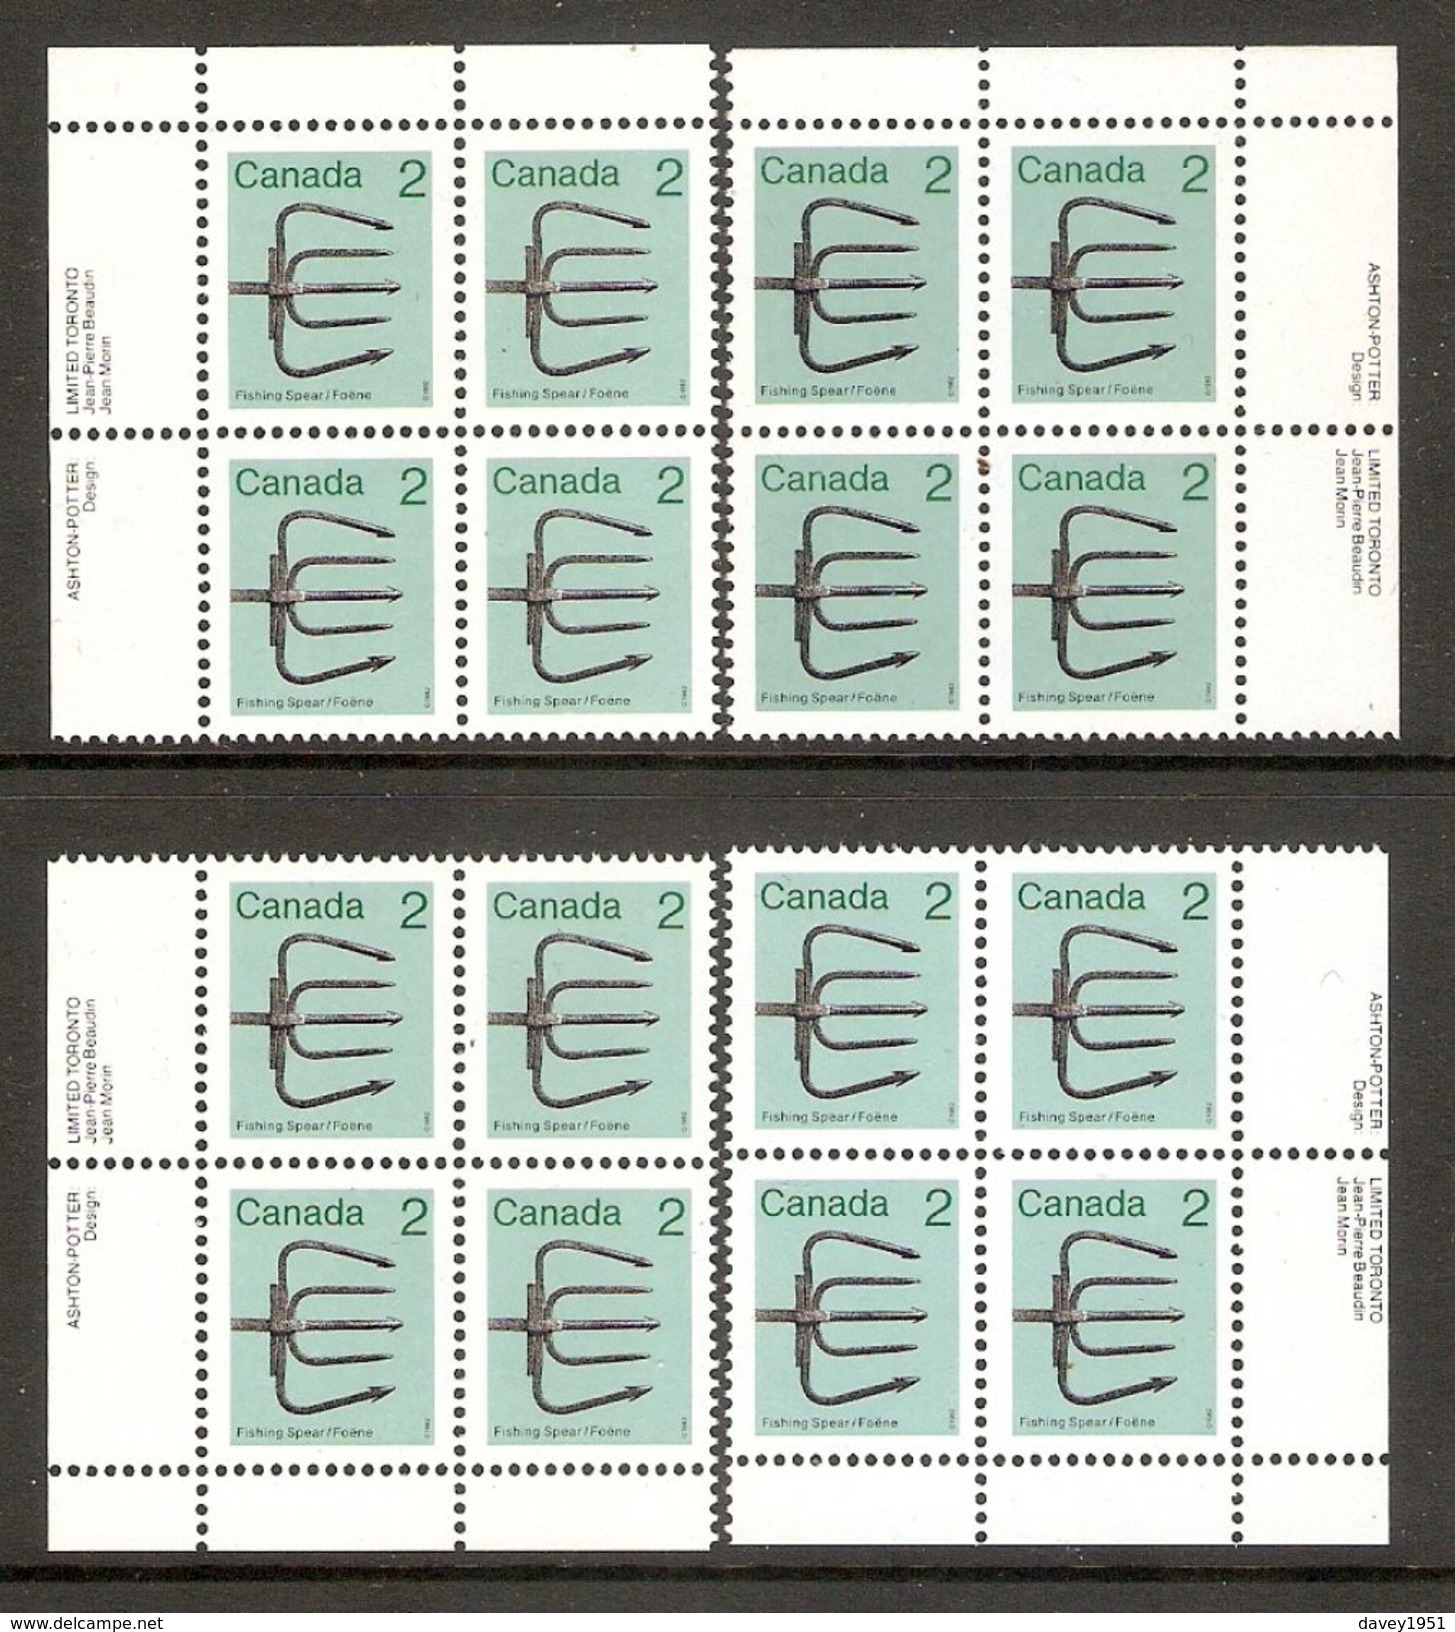 006114 Canada 1982 2c Plate Block Set MNH - Plate Number & Inscriptions